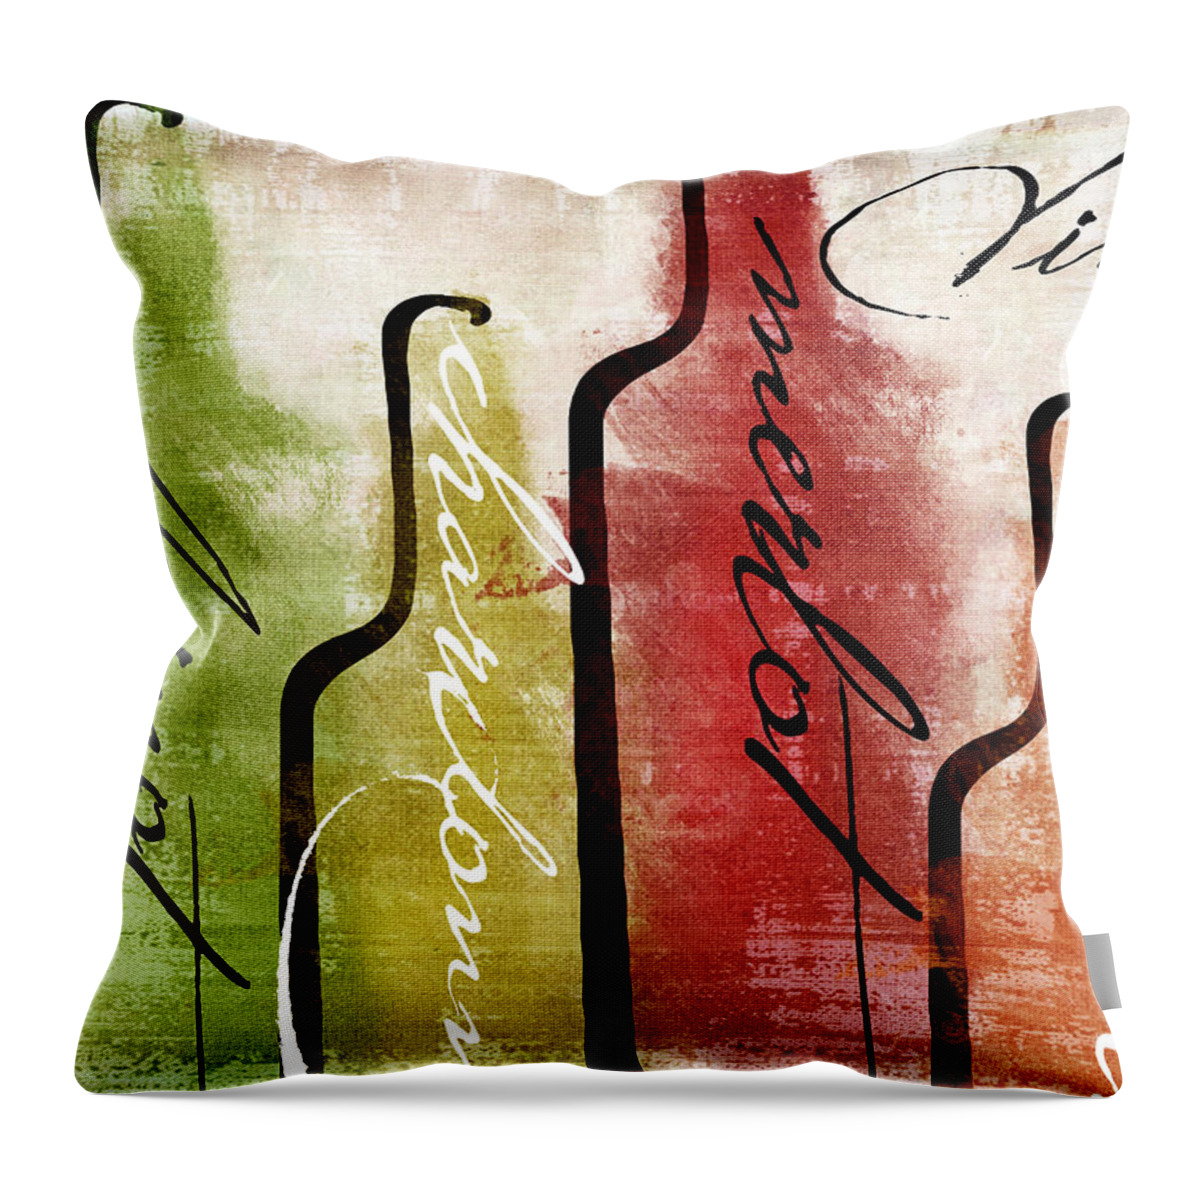 Wine Throw Pillow featuring the painting Wine Tasting I by Mindy Sommers